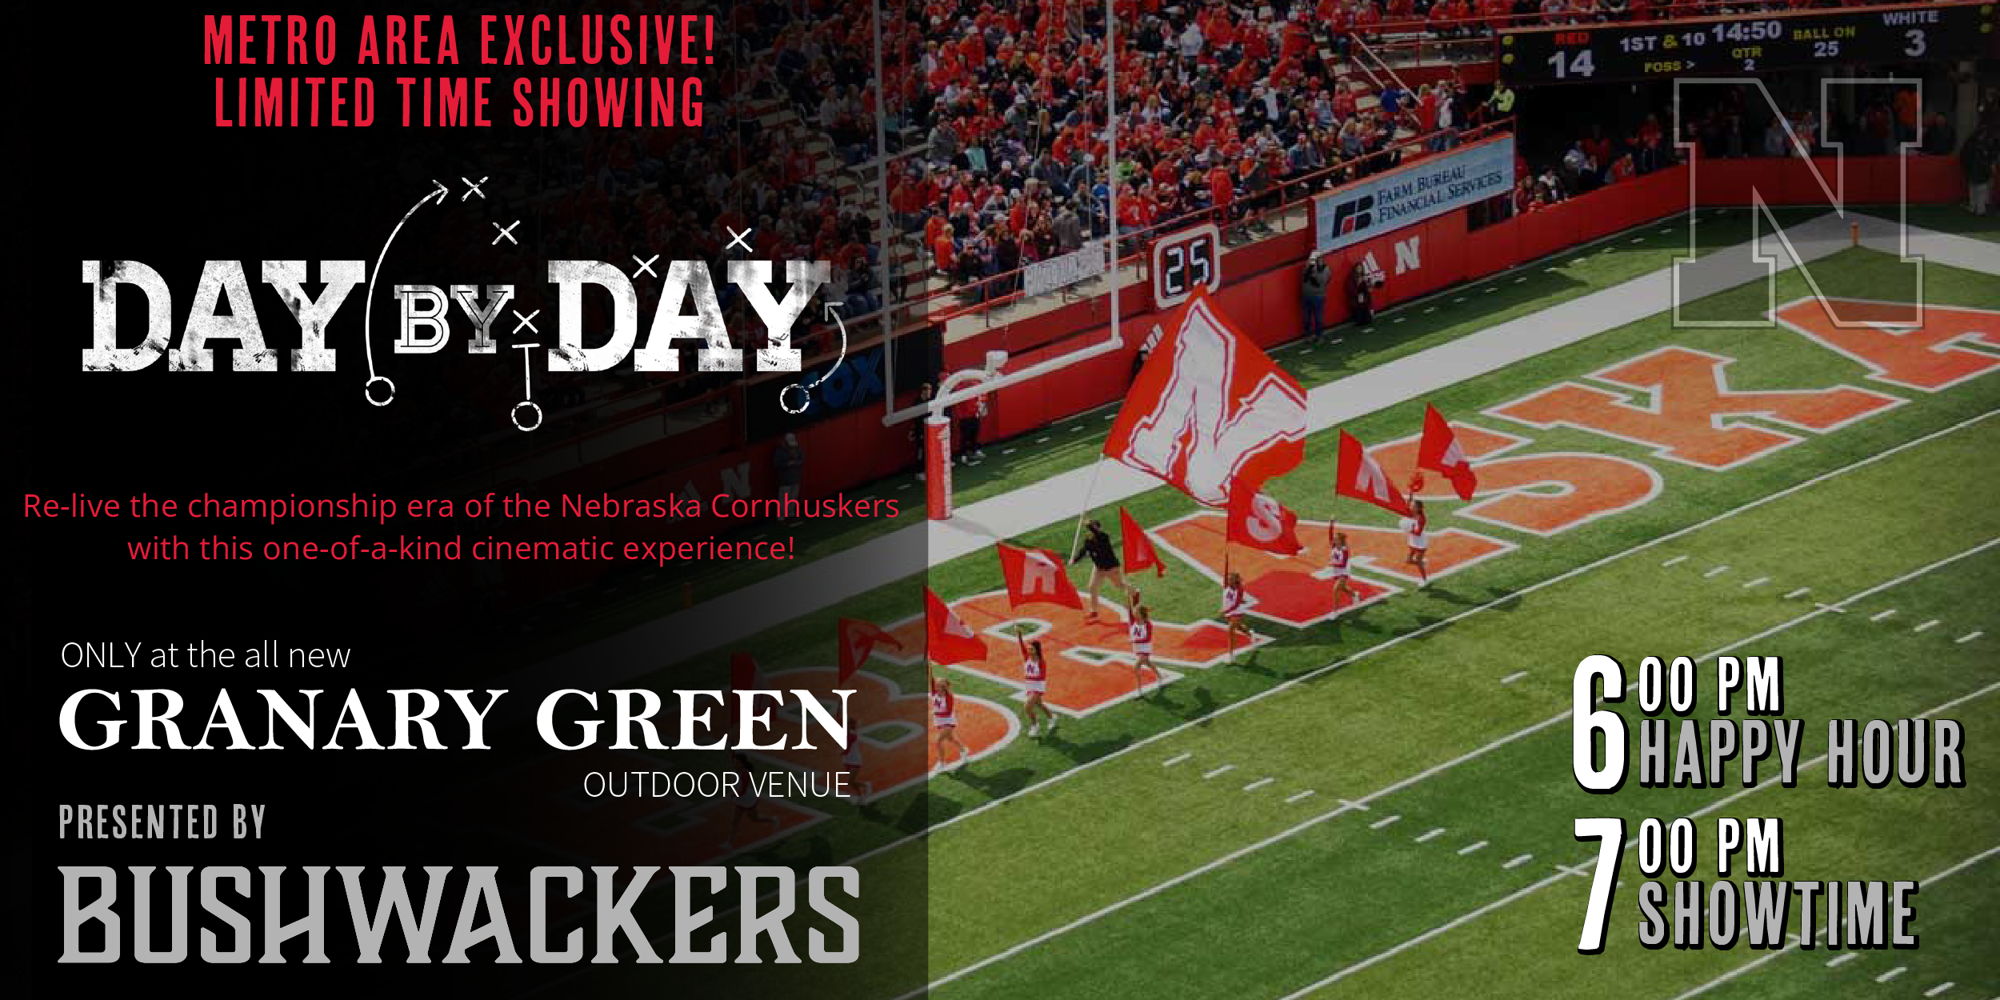 Week 5 of 8: Friday Night Football Film - Showing of "Day by Day" Husker Documentary (Part 1) promotional image